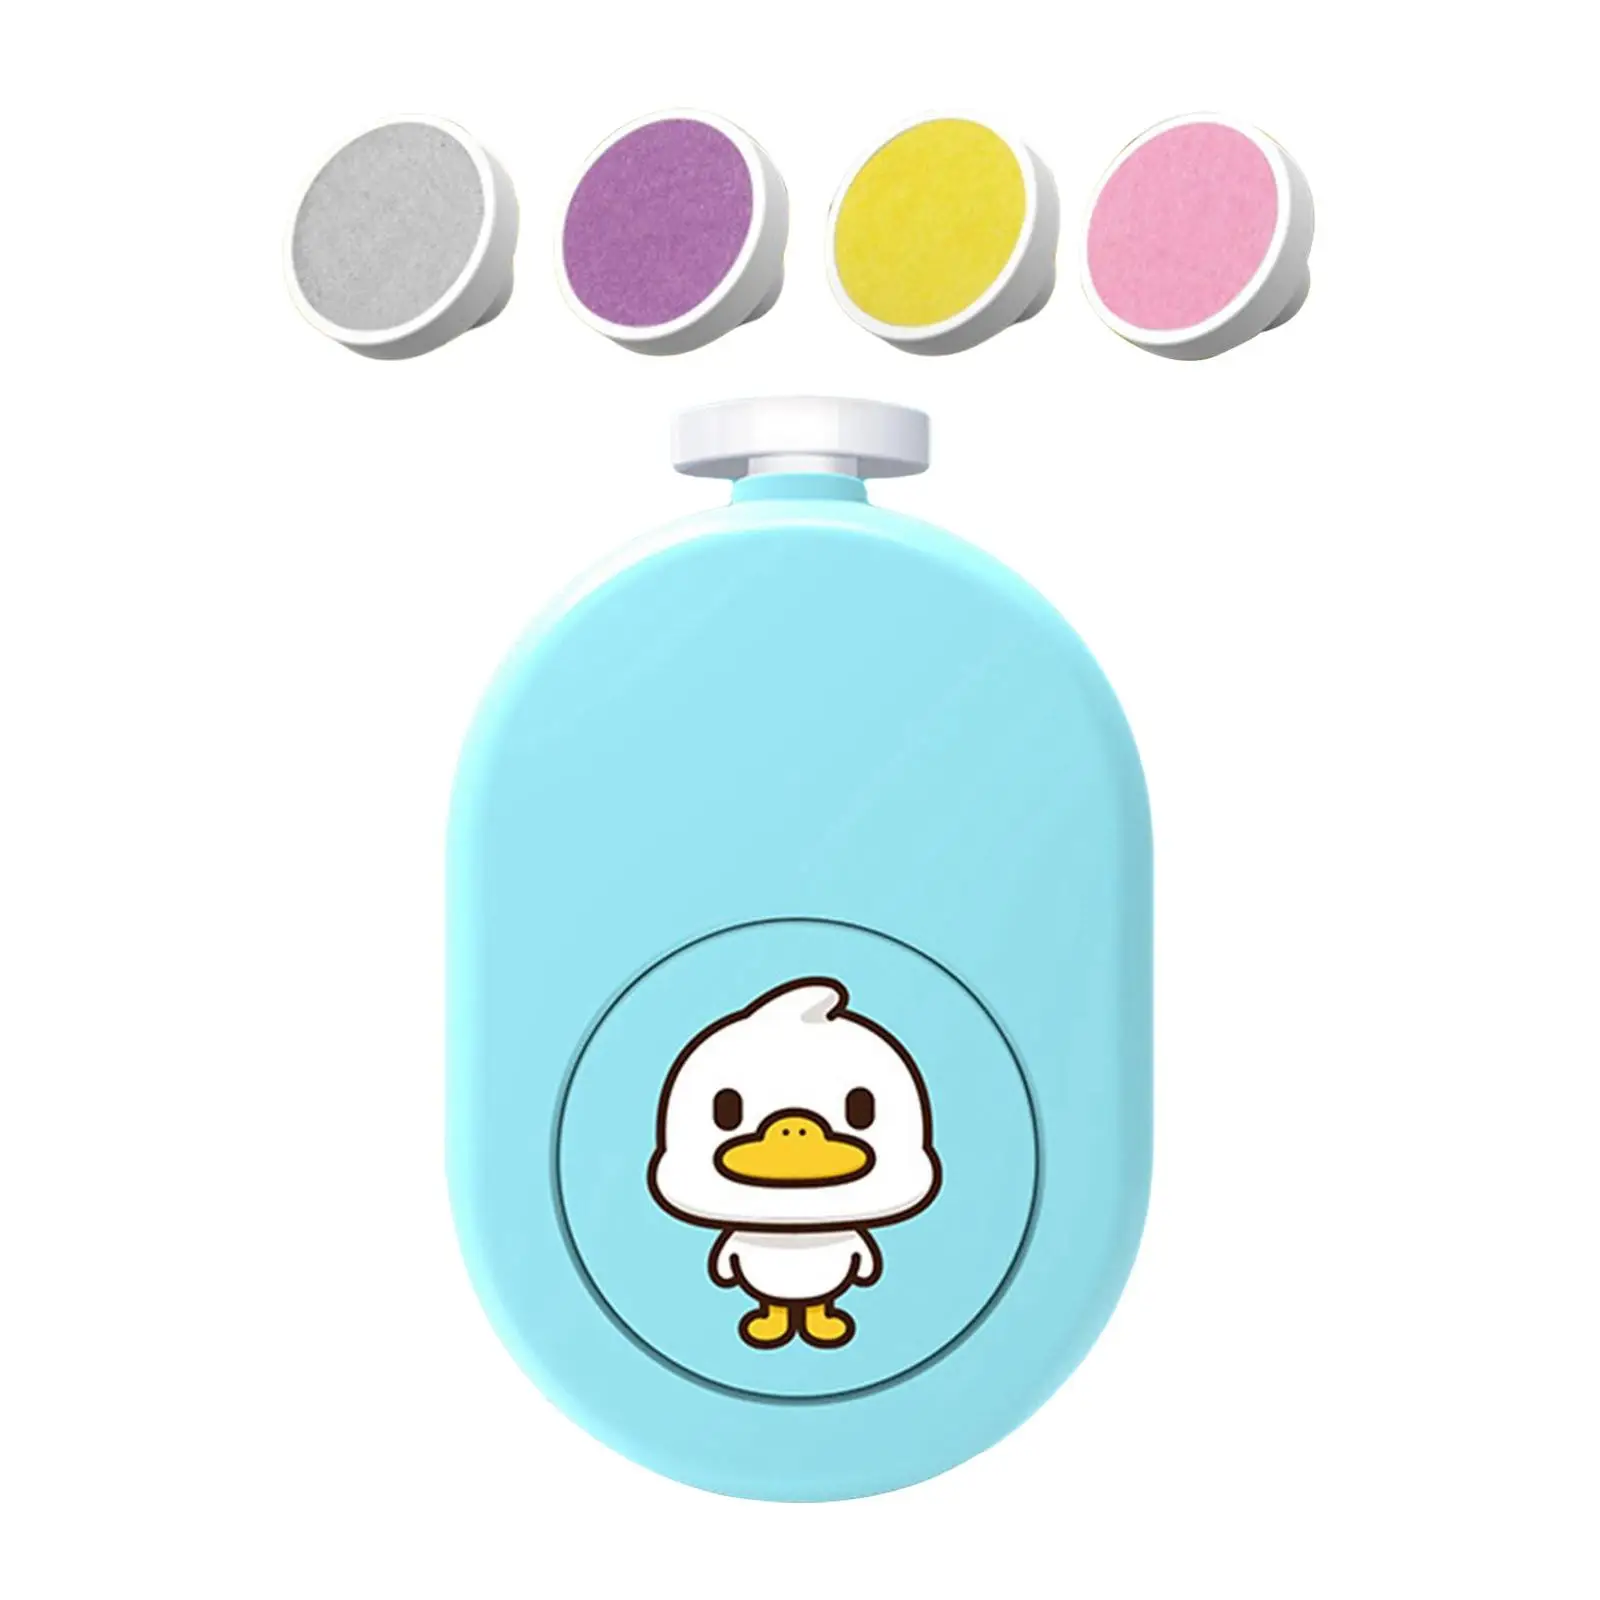 Cute Electric Baby Manicure Set Nail Fingernails Polishing Baby Nail Grooming Kit Nail Polisher for Infant Adults Kids